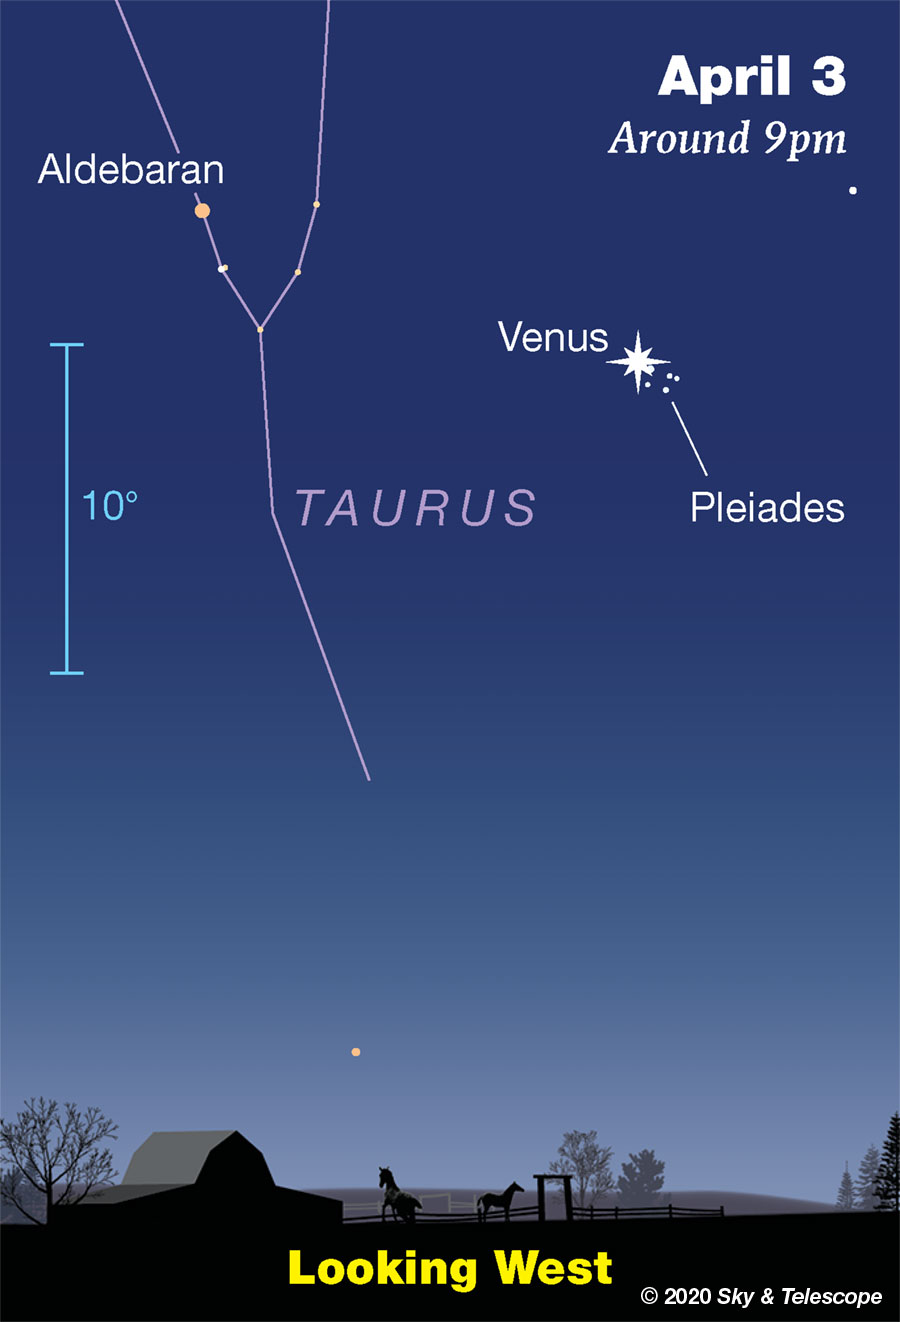 Pleiades is right next to Venus on the morning of April 3 looking west